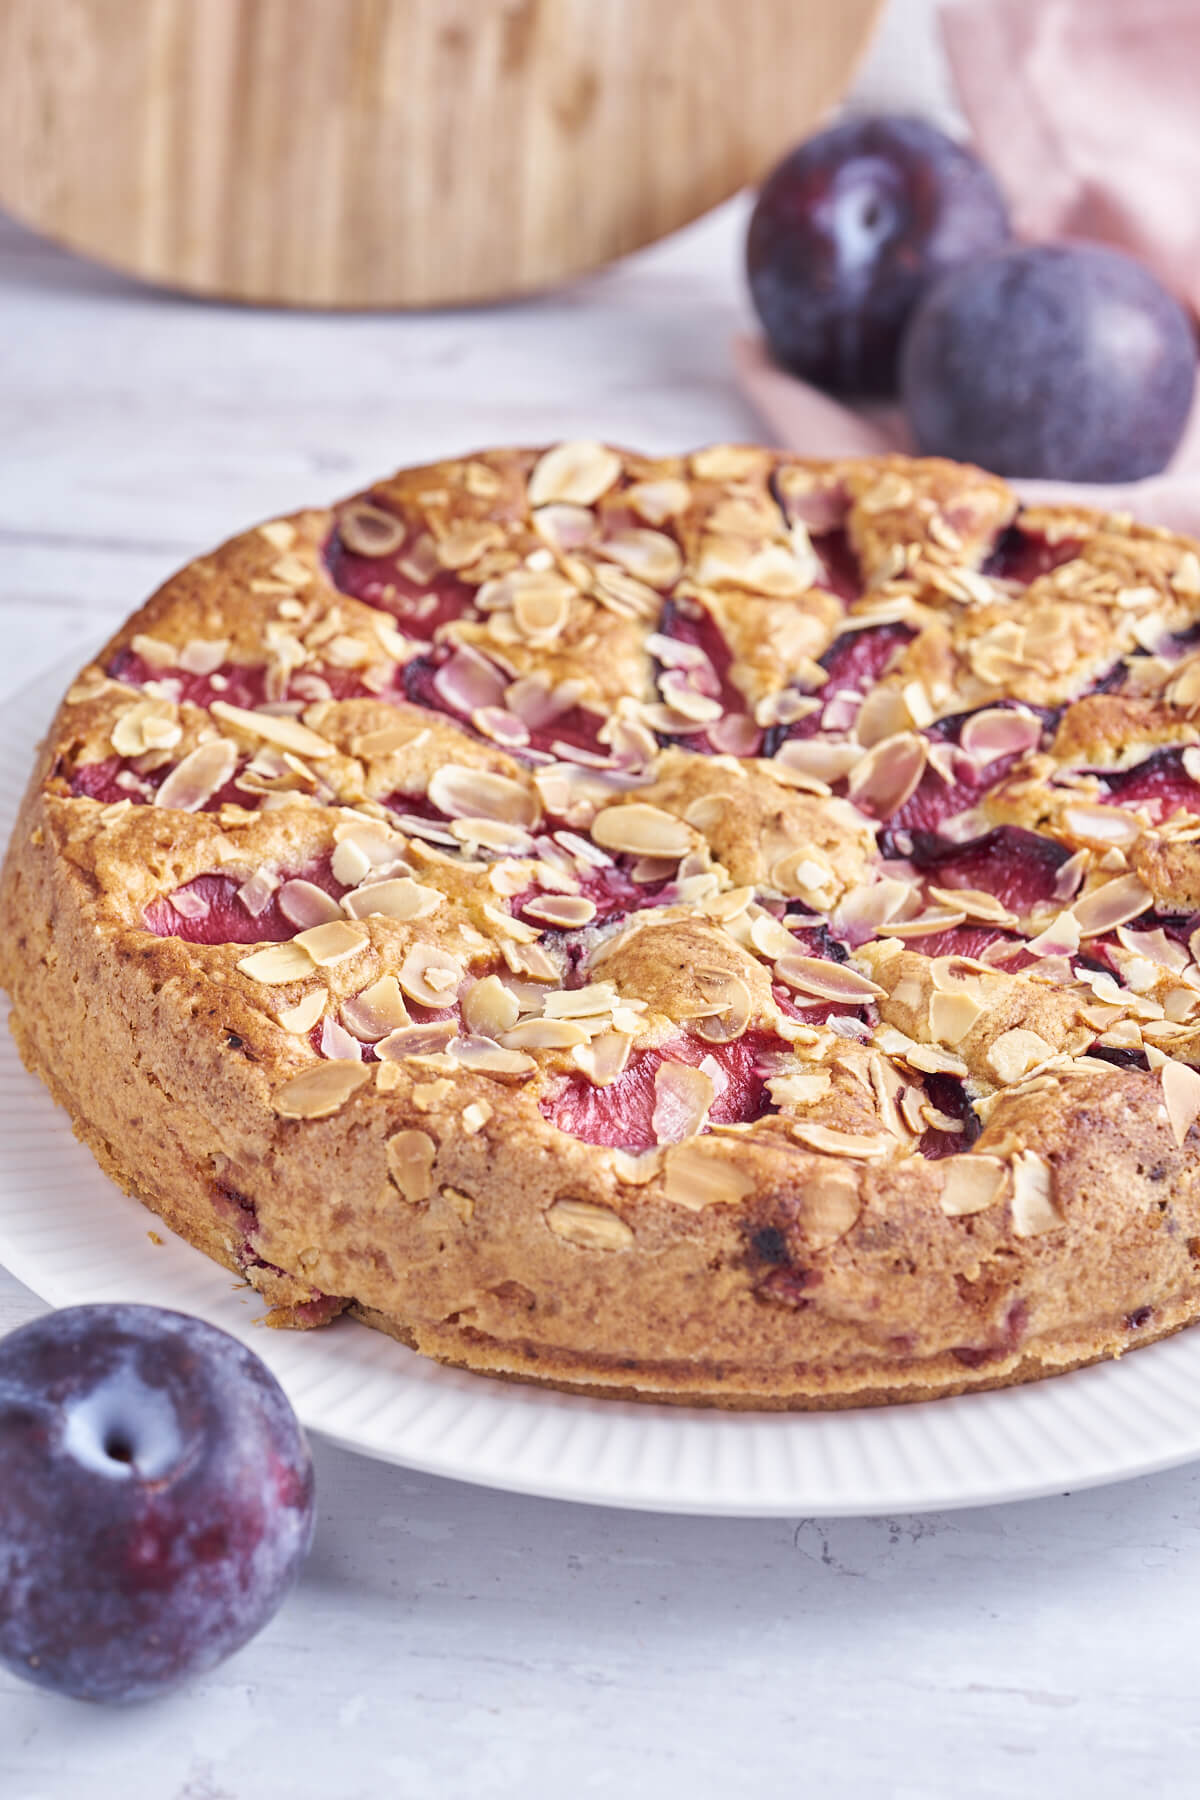 plum cake with almond flakes on plate with fresh plums